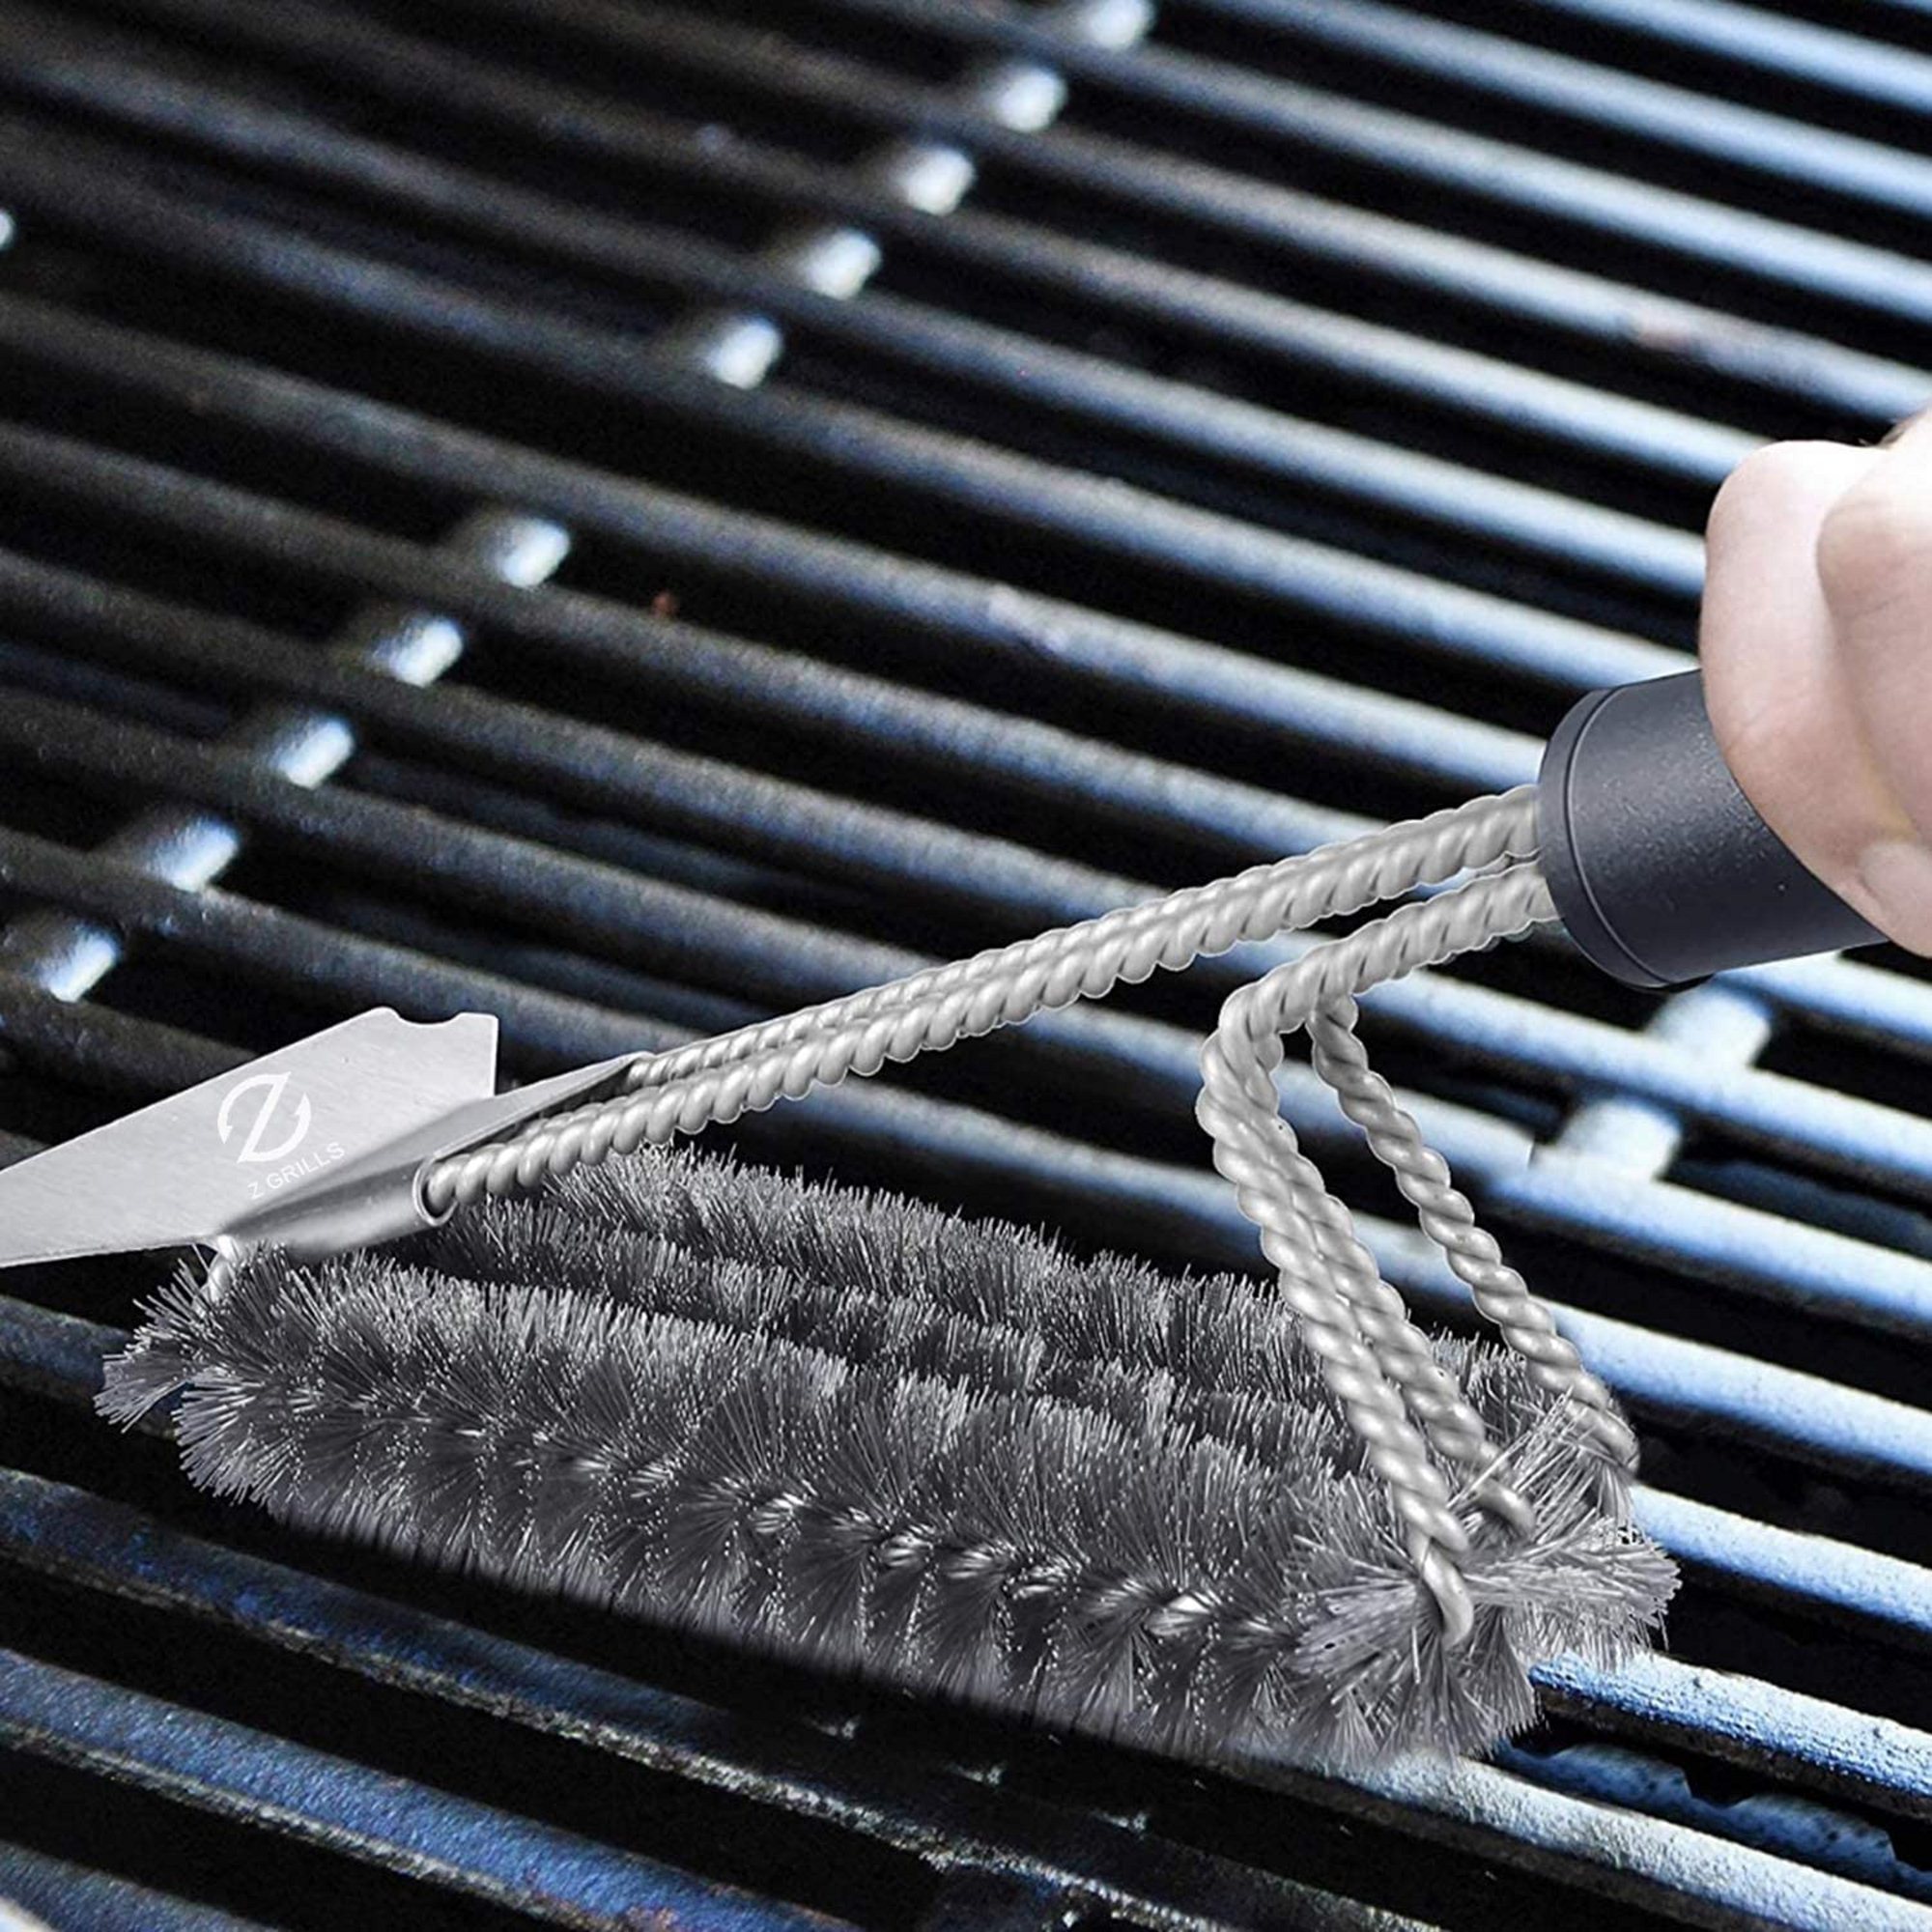 Z GRILLS BBQ Grill Brush Scraper Cleaning Tool Stainless Steel